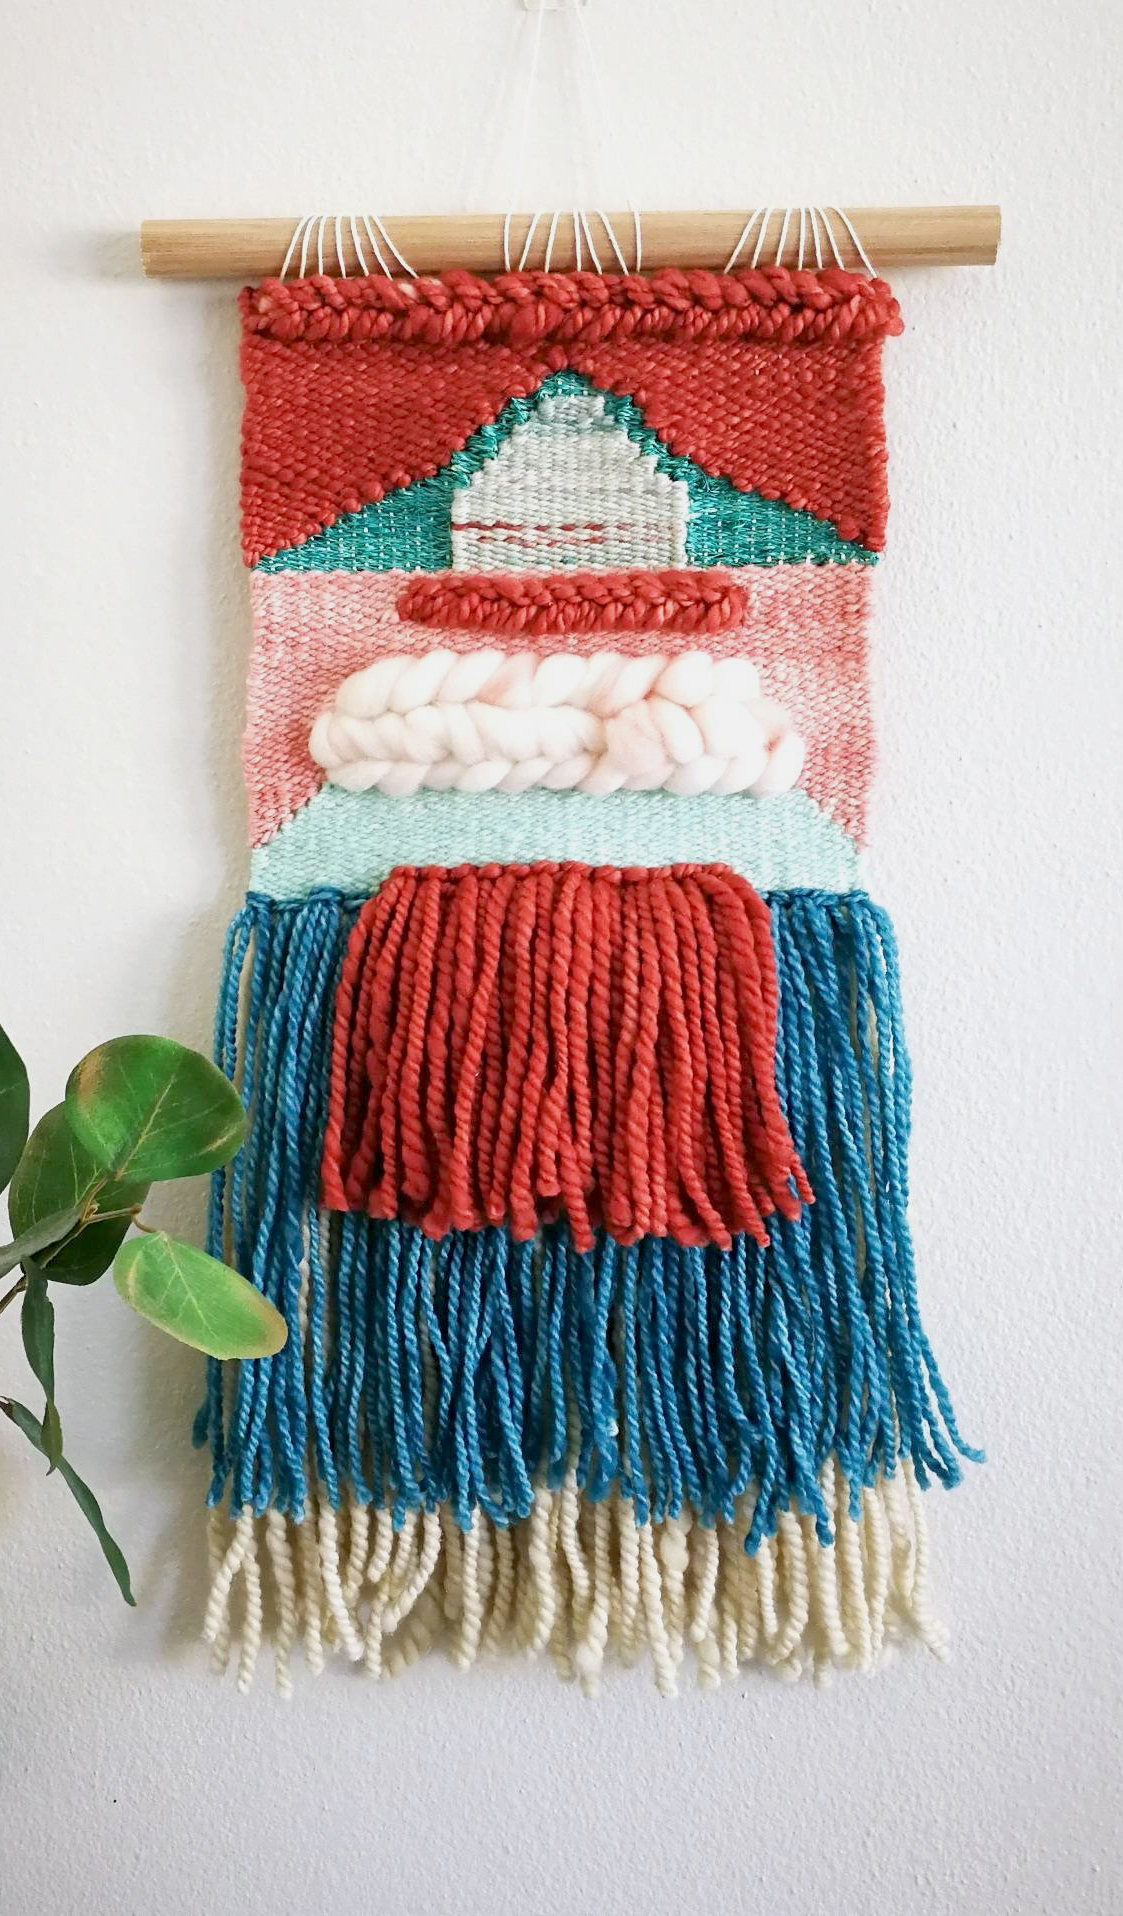 Modern woven wall hanging | Jade & Frankie on Etsy